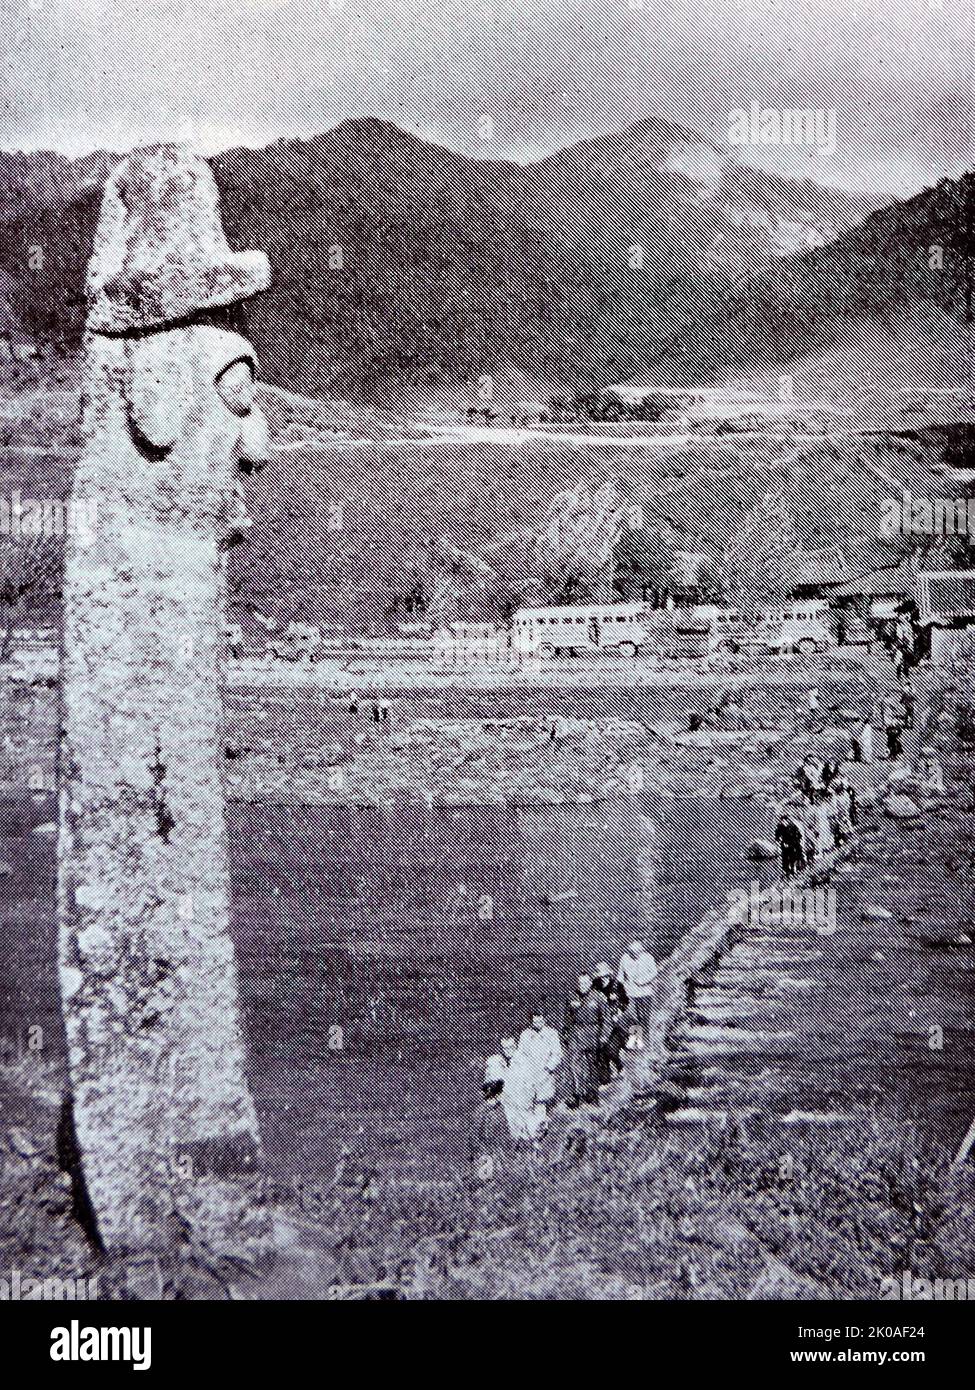 A jangseung or village guardian; a Korean totem pole usually made of wood. Jangseungs were traditionally placed at the edges of villages to mark village boundaries and frighten away demons. 1960 Stock Photo